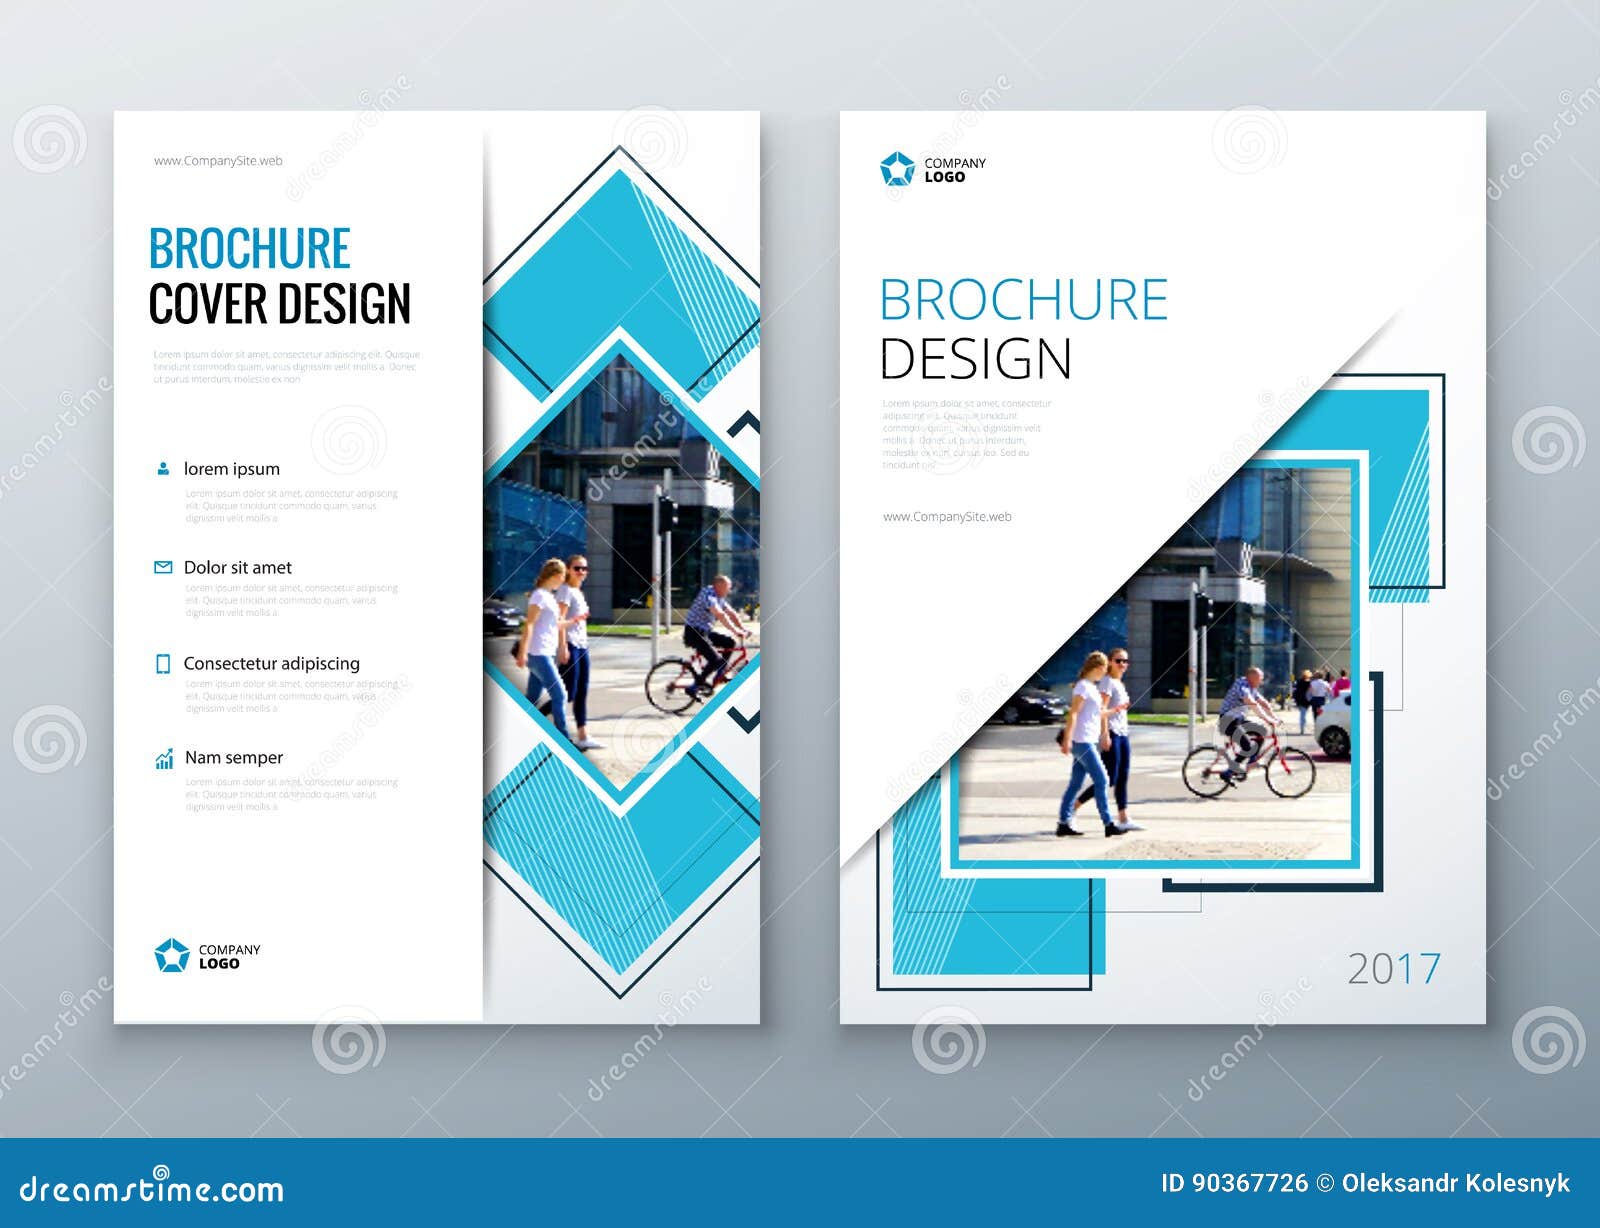 Brochure Template Layout Design Corporate Business Annual Report Catalog Magazine Flyer Mockup Creative Modern Stock Vector Illustration Of Background Concept